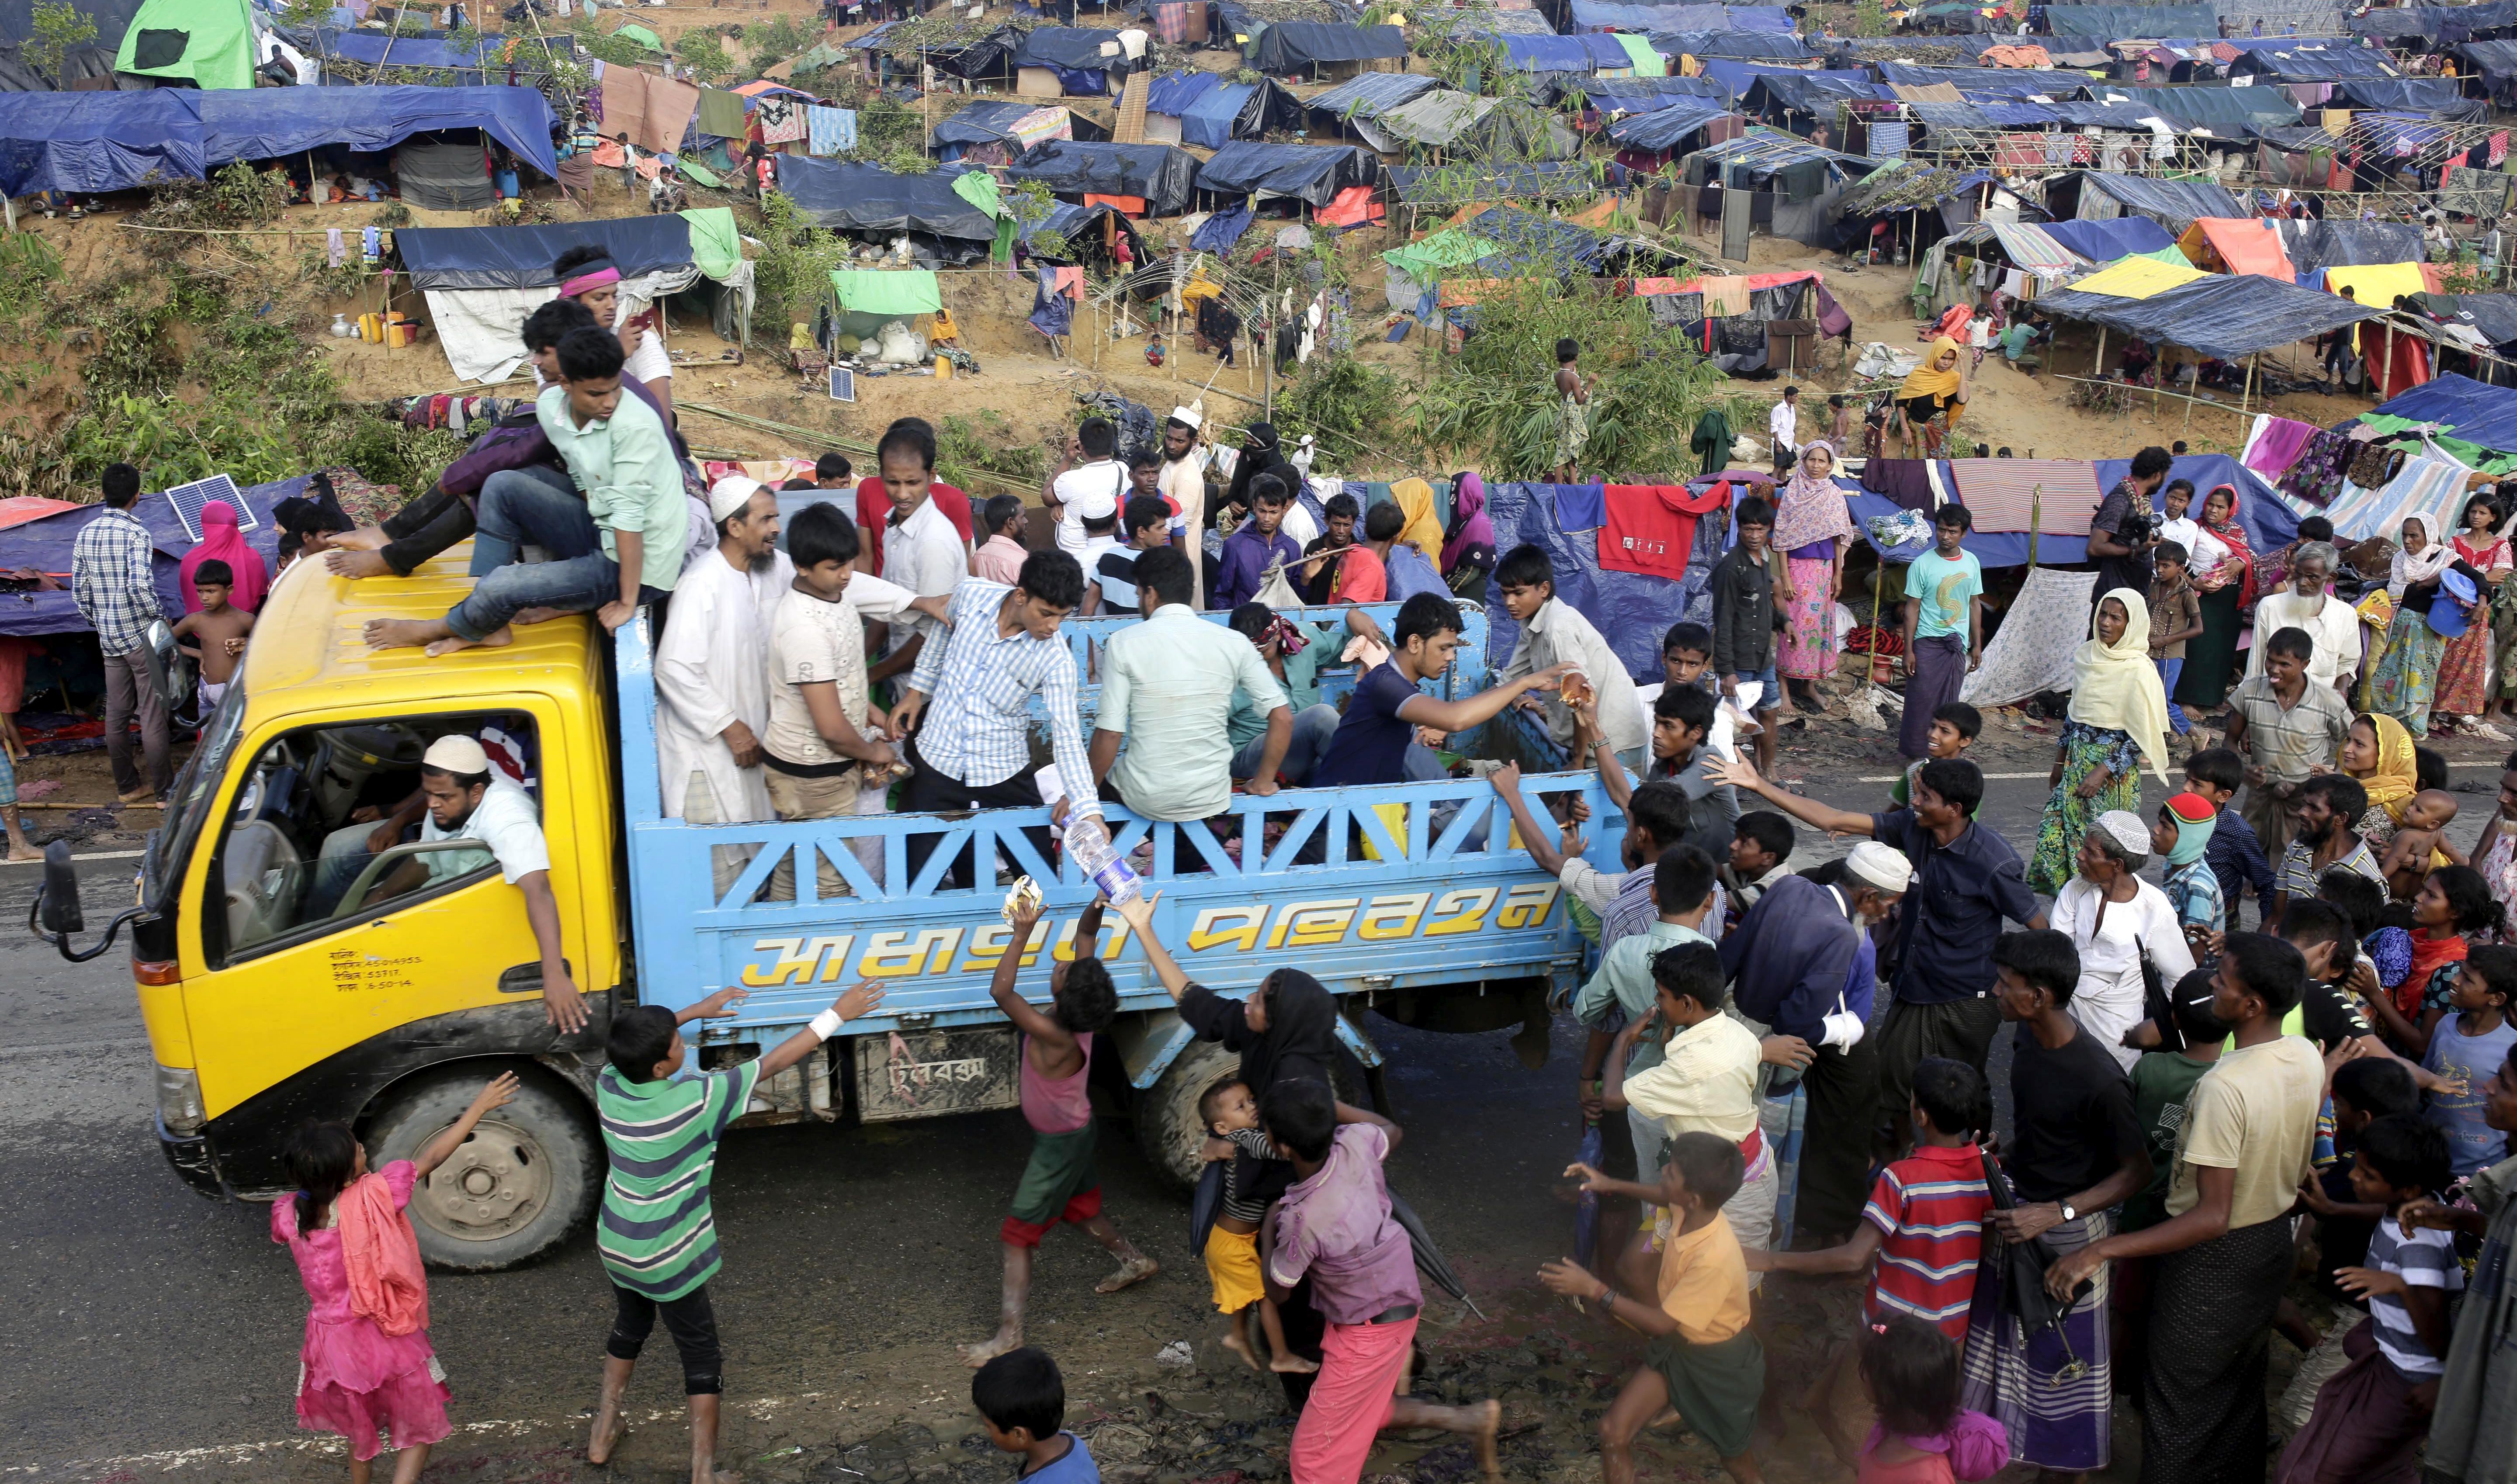 epa06210705 Rohingya refugees try to catch the relief from a truck at Tangkhali, Ukhiya, Bangladesh, 17 September 2017. According to UNHCR more than 400 thousand Rohingya refugees have fled Myanmar from violence over the last few weeks, most trying to cross the border and reach Bangladesh. International organizations have reported claims of human rights violations and summary executions allegedly carried out by the Myanmar army.  EPA/ABIR ABDULLAH